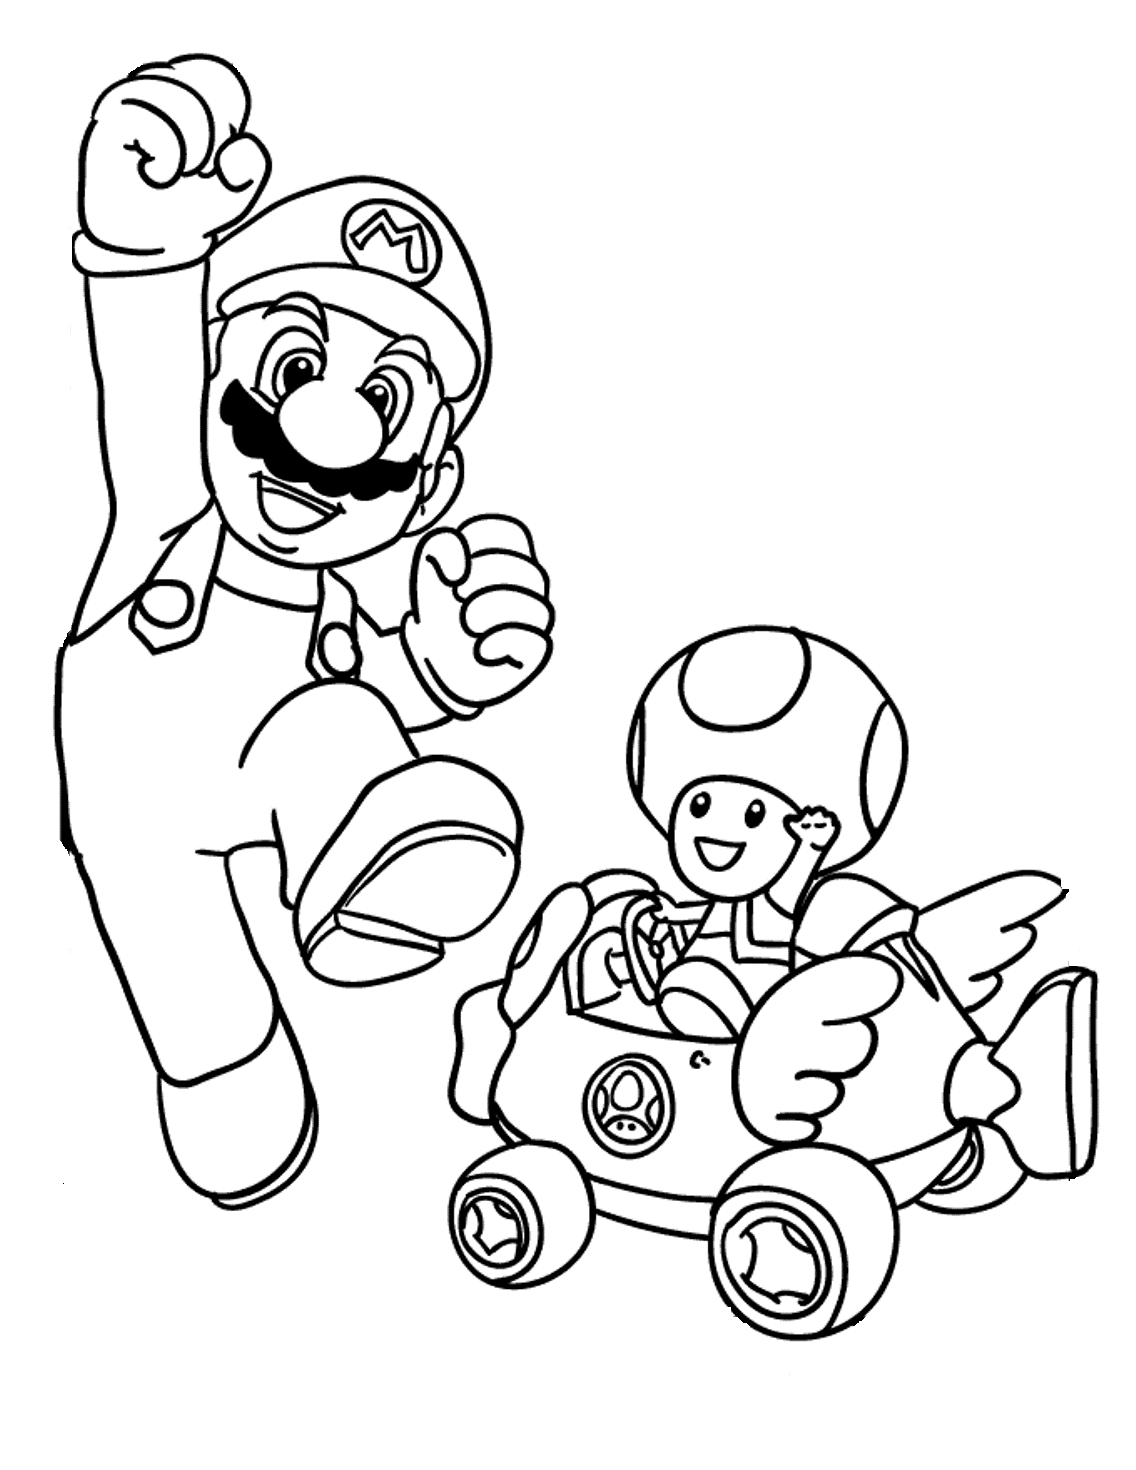 946 Cute Mario 64 Coloring Pages with Printable